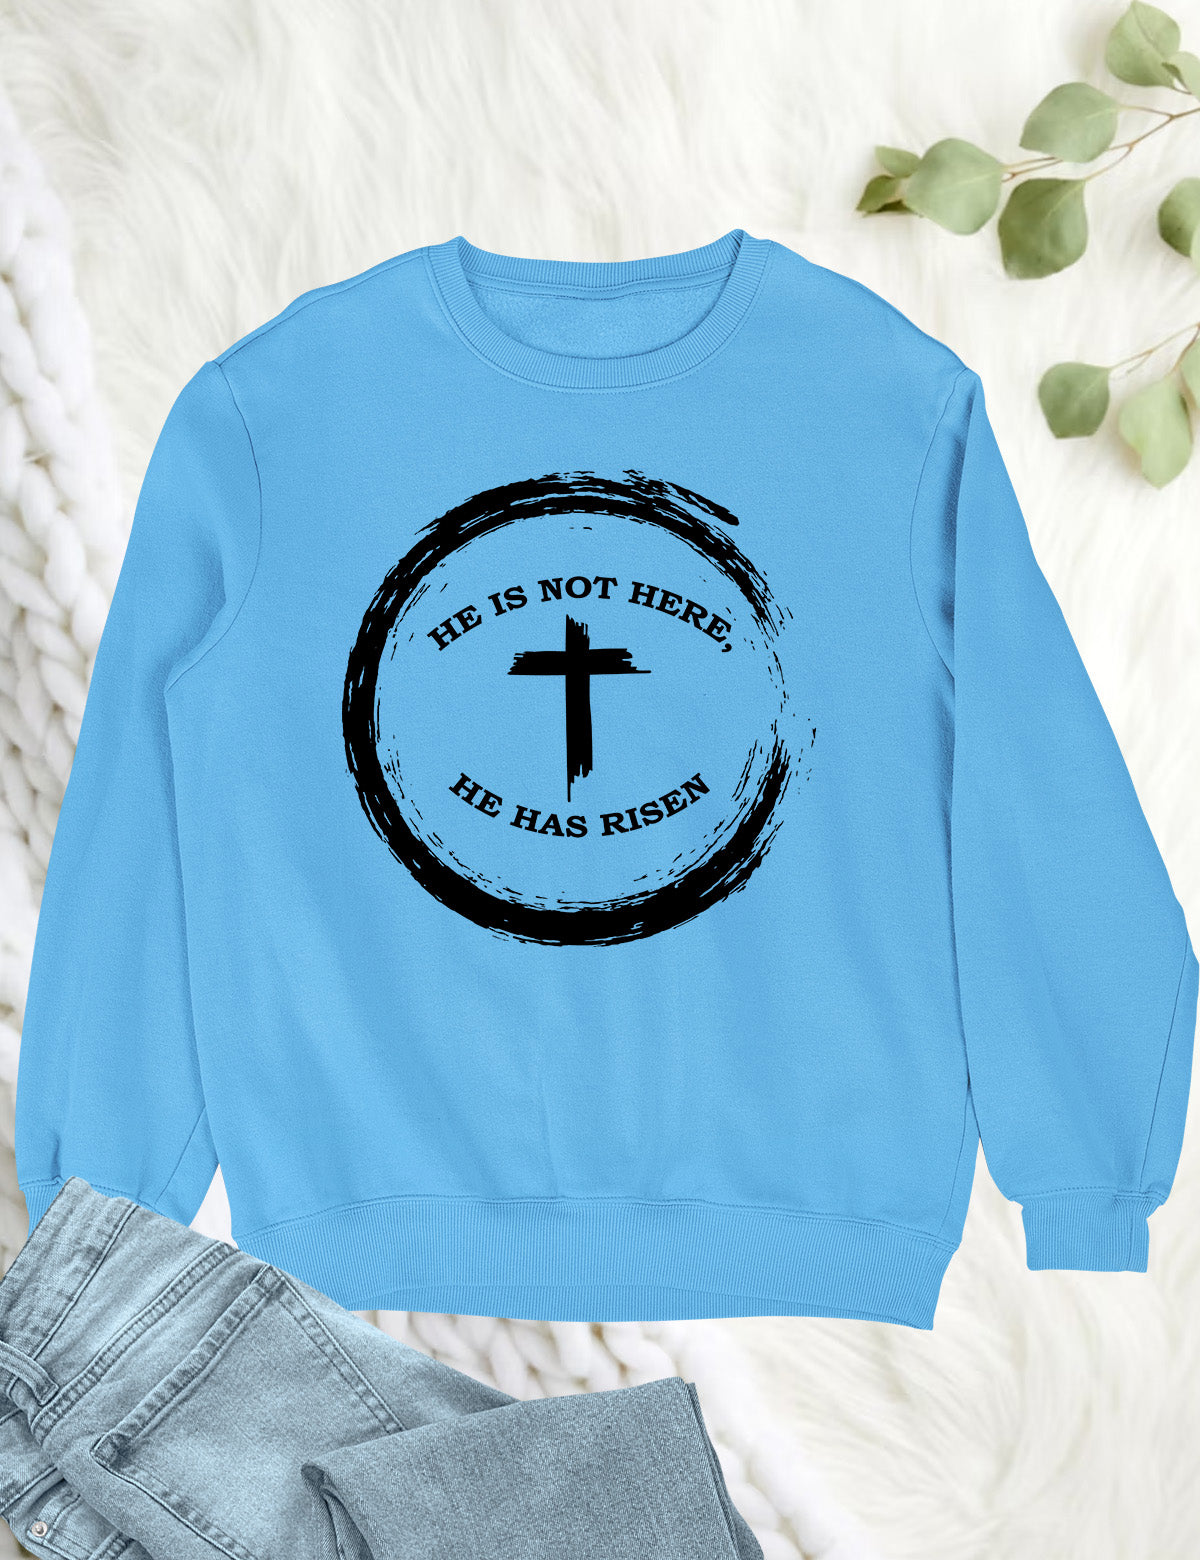 He is Not There He has Risen Christian Sweatshirts for men